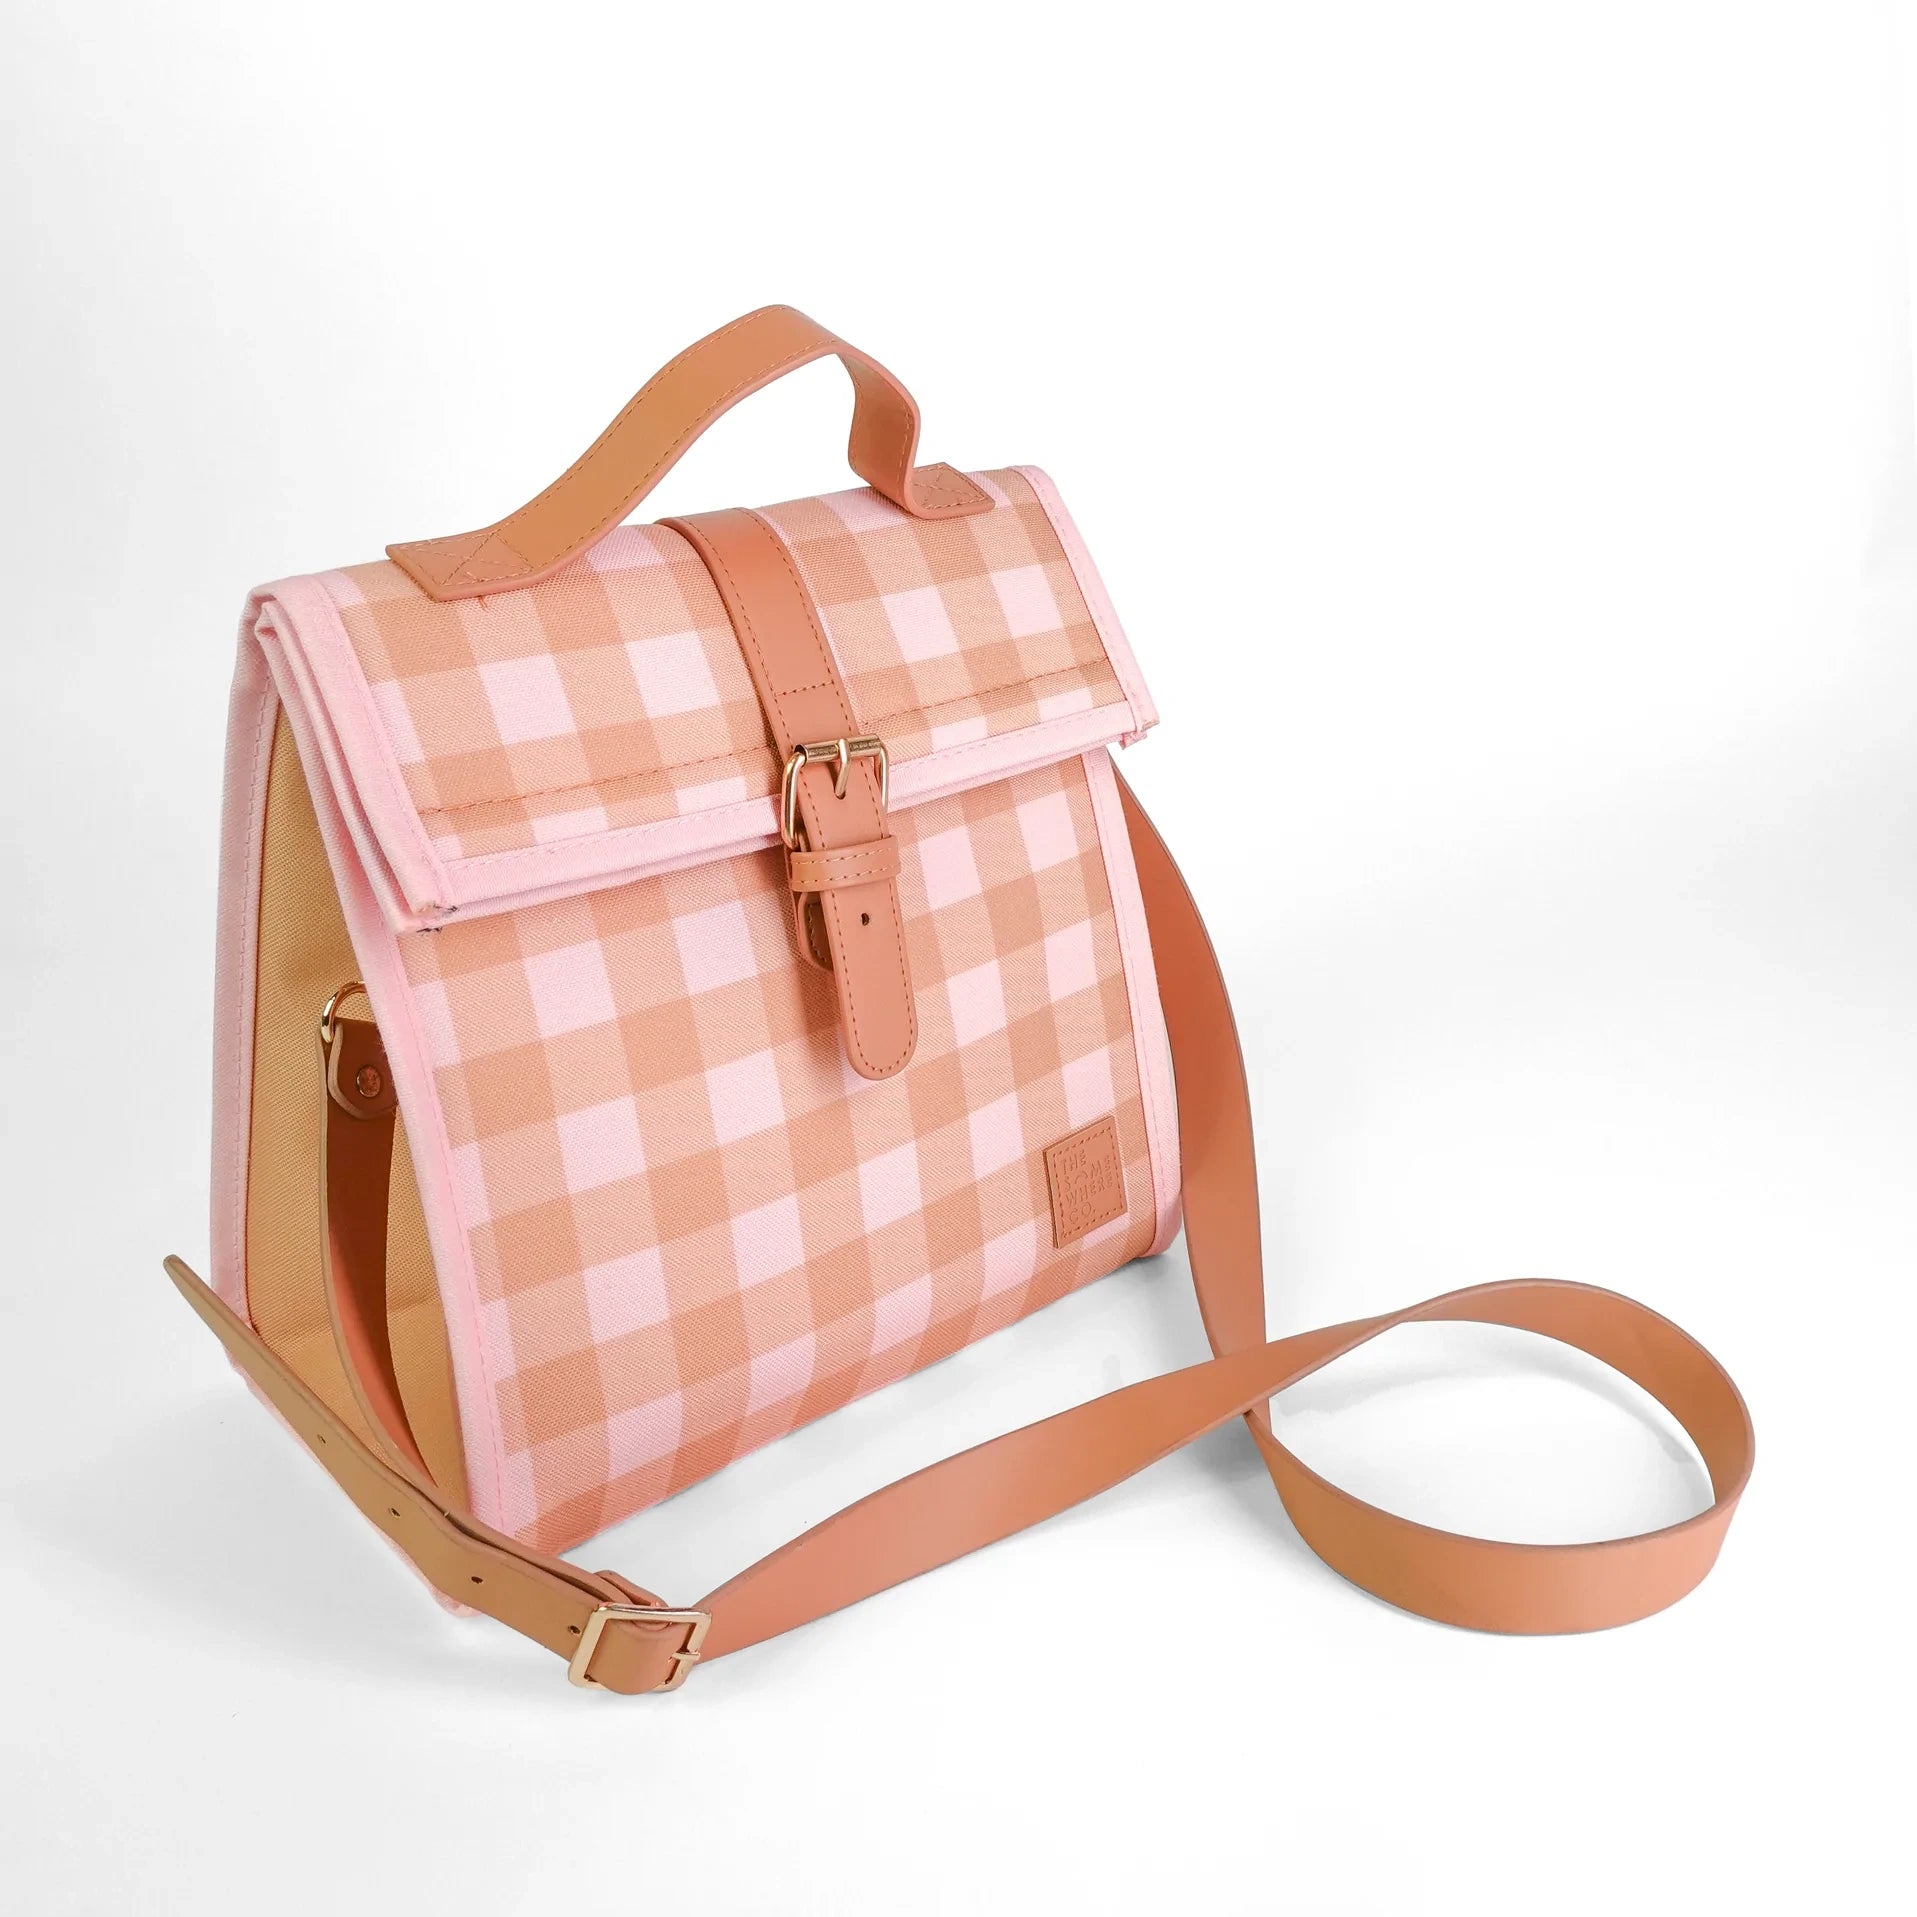 Rose All Day Lunch Satchel by The Somewhere Co